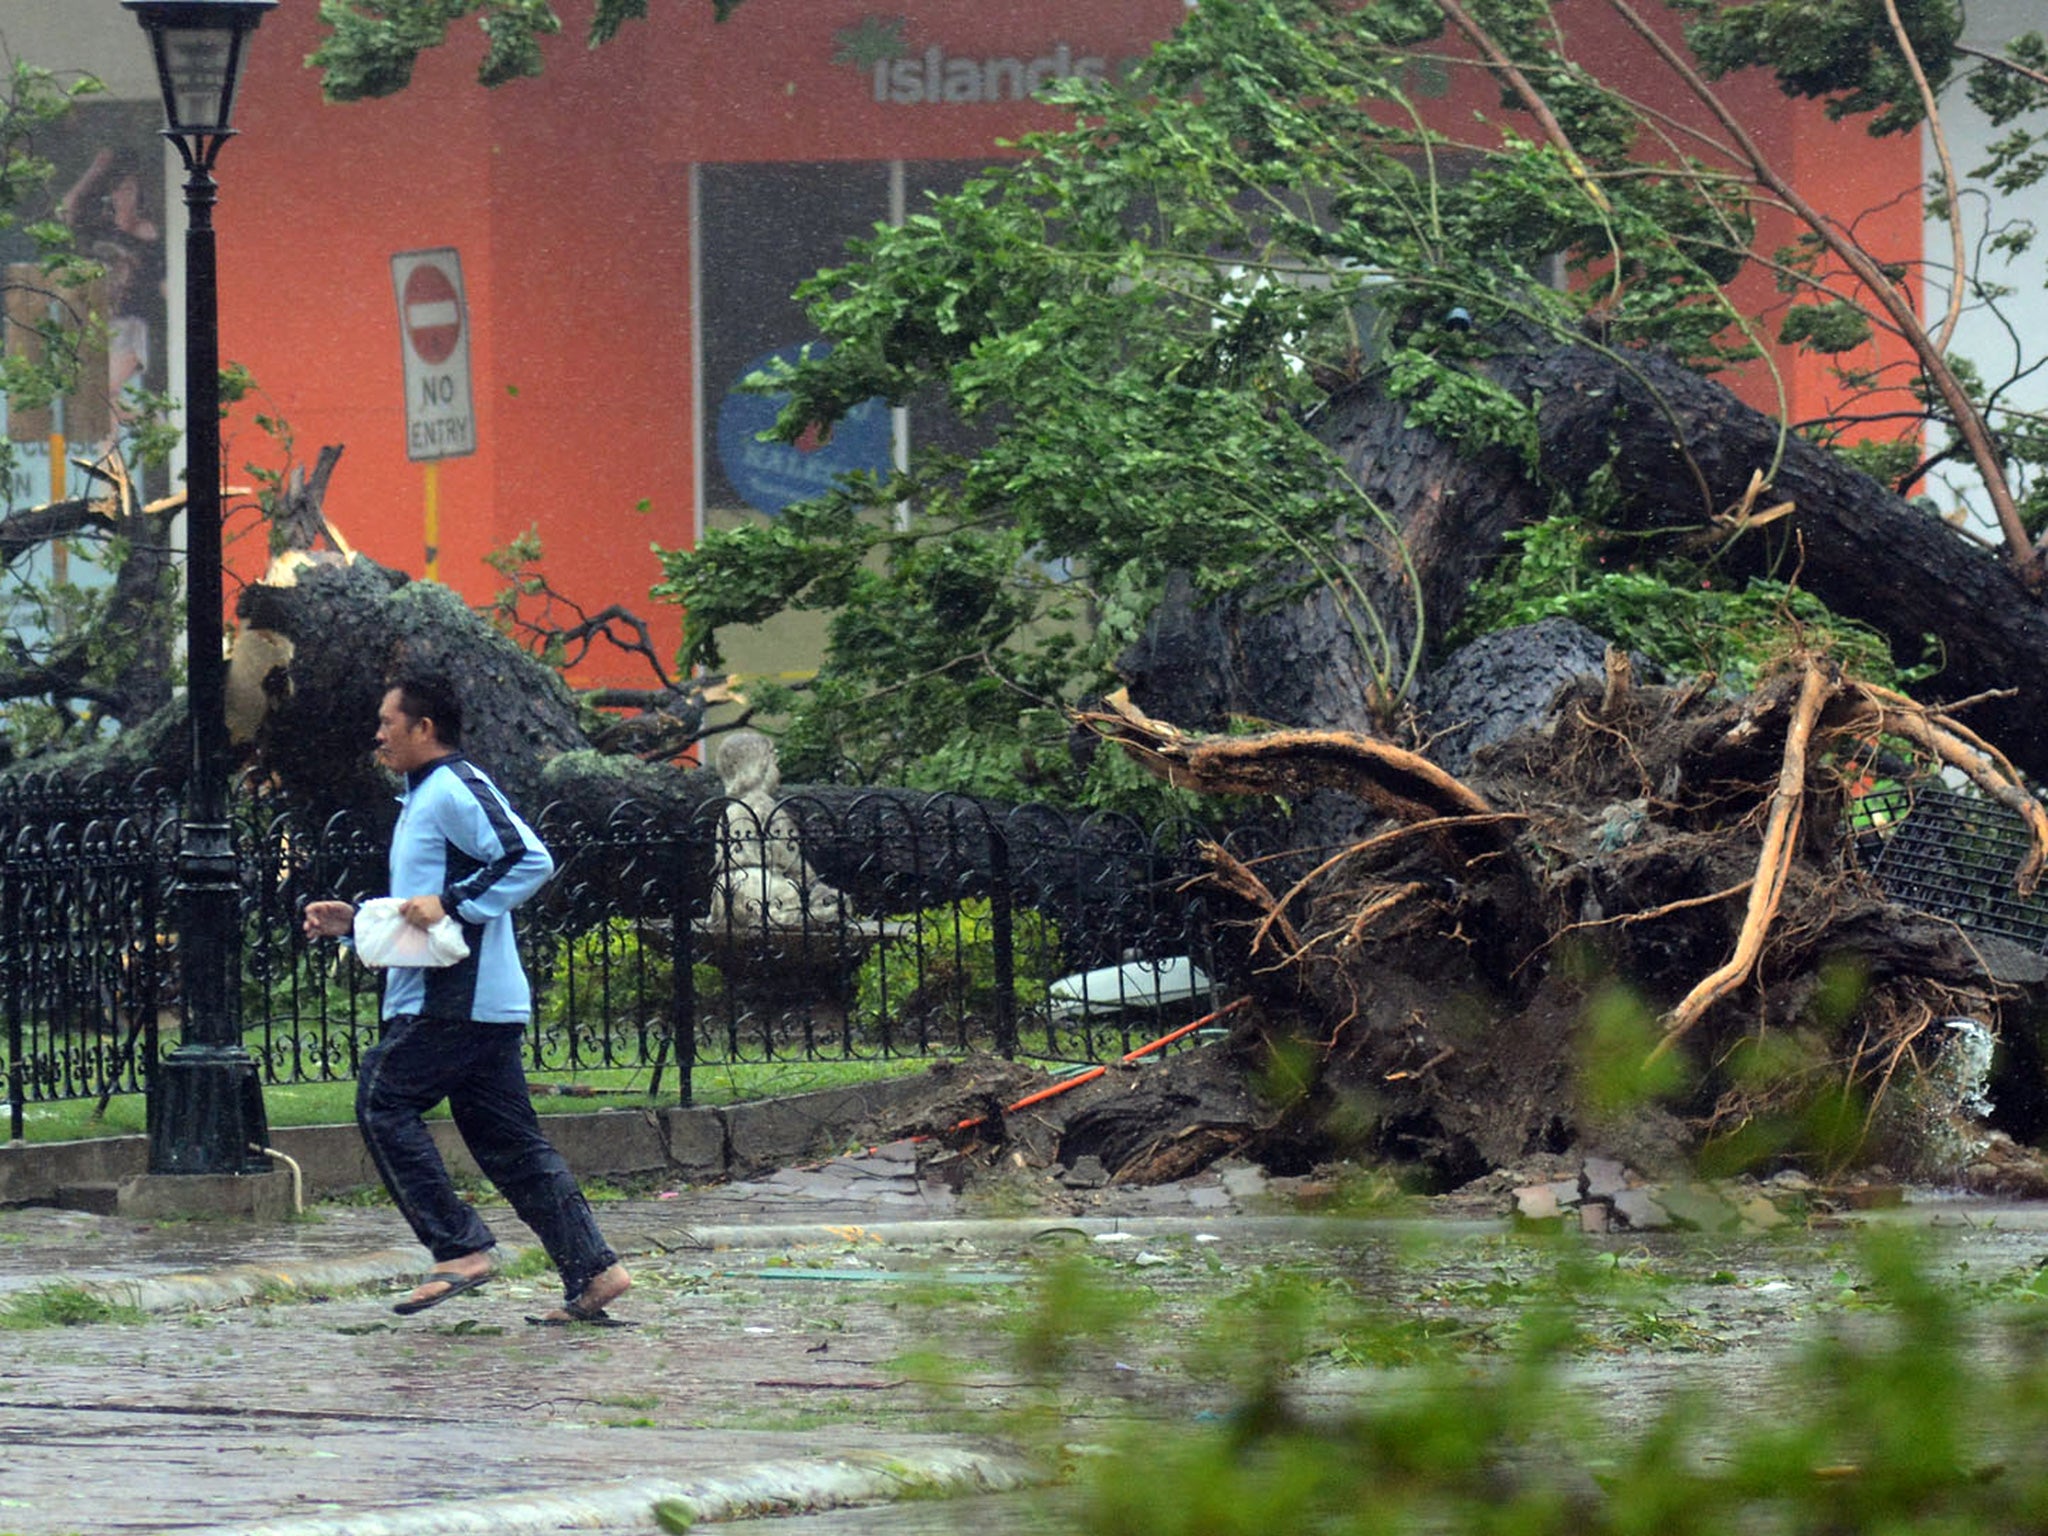 A resident runs past an uprooted tree amidst strong winds as Typhoon Haiyan pounded Cebu City, in central Philippines